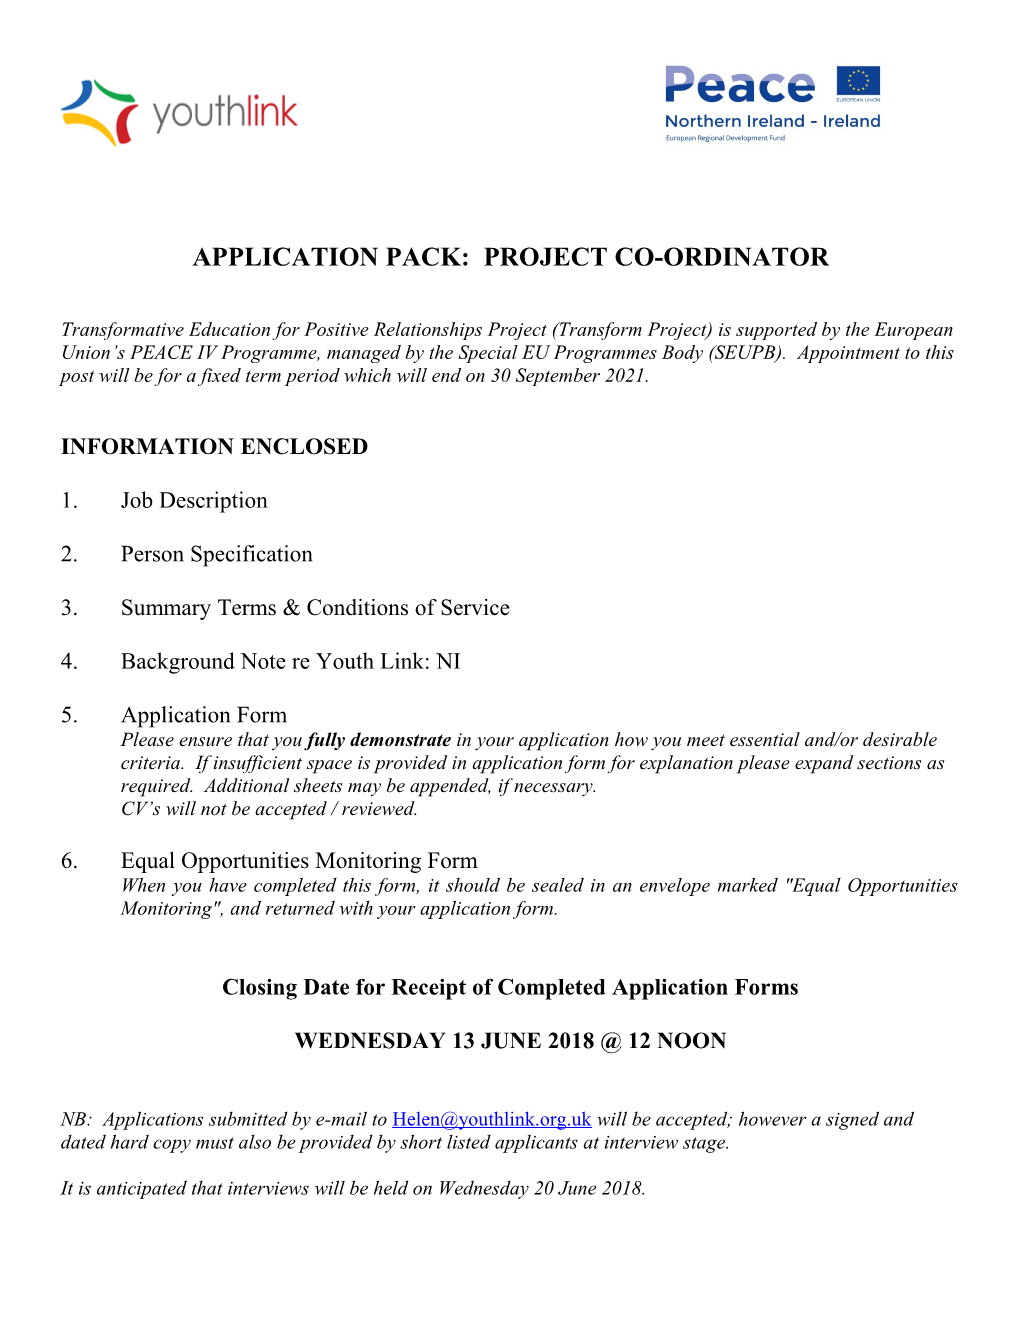 Application Pack: Project Co-Ordinator